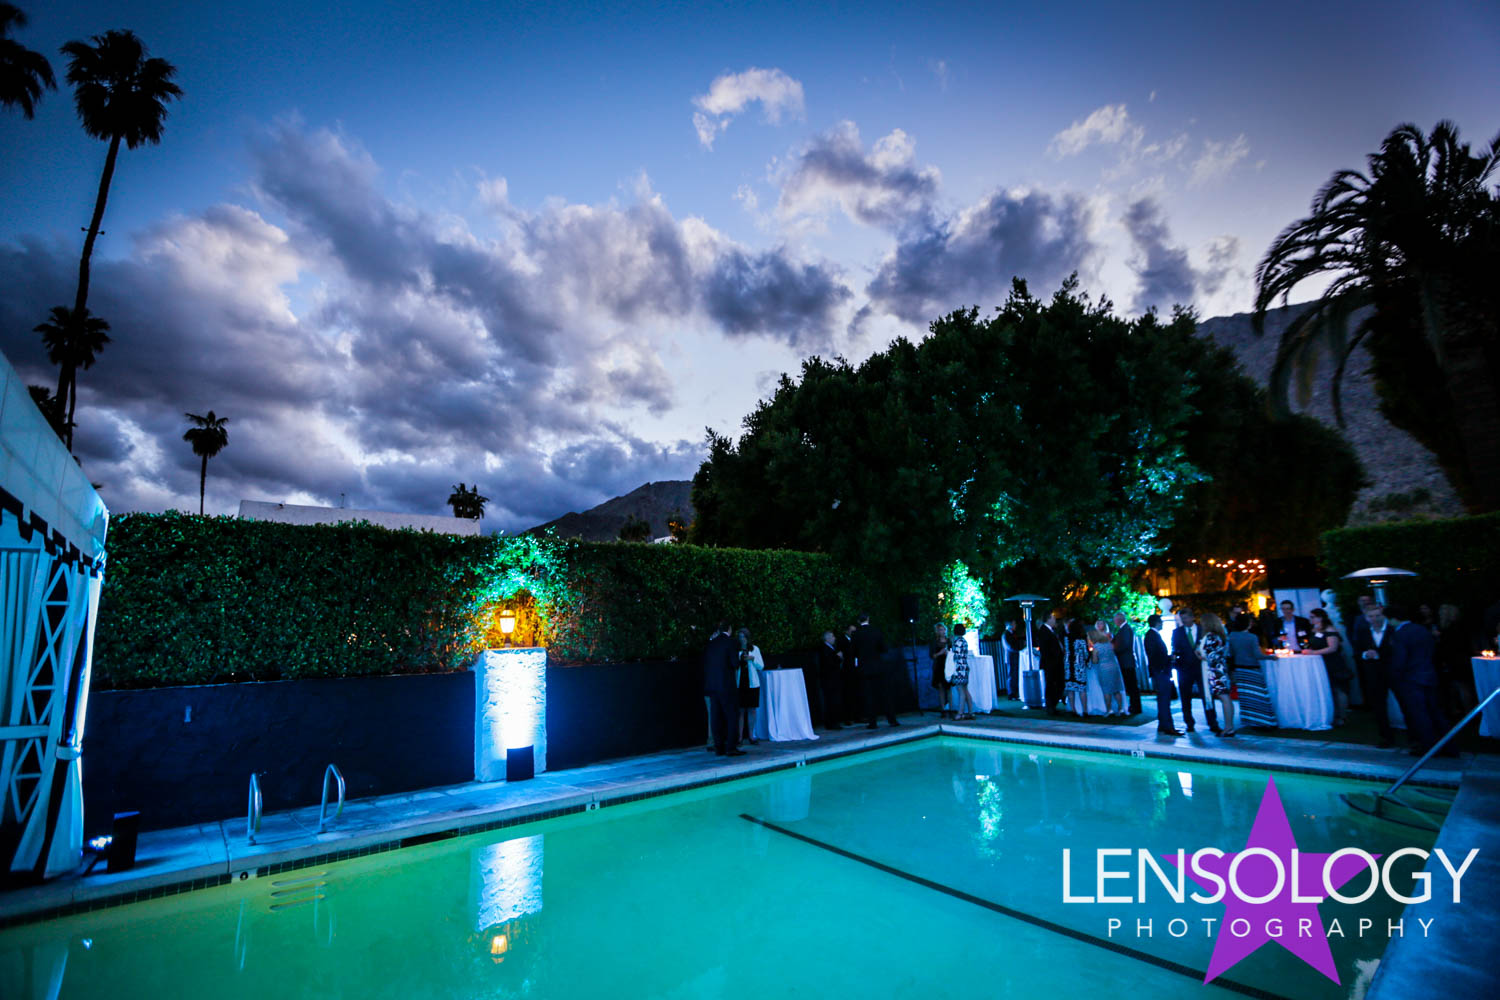 LENSOLOGY.NET - Strategic Incentives Solutions Palm Springs awards event, CA.
All images are copyright of Lensology.net
Email: info@lensology.net
www.lensology.net